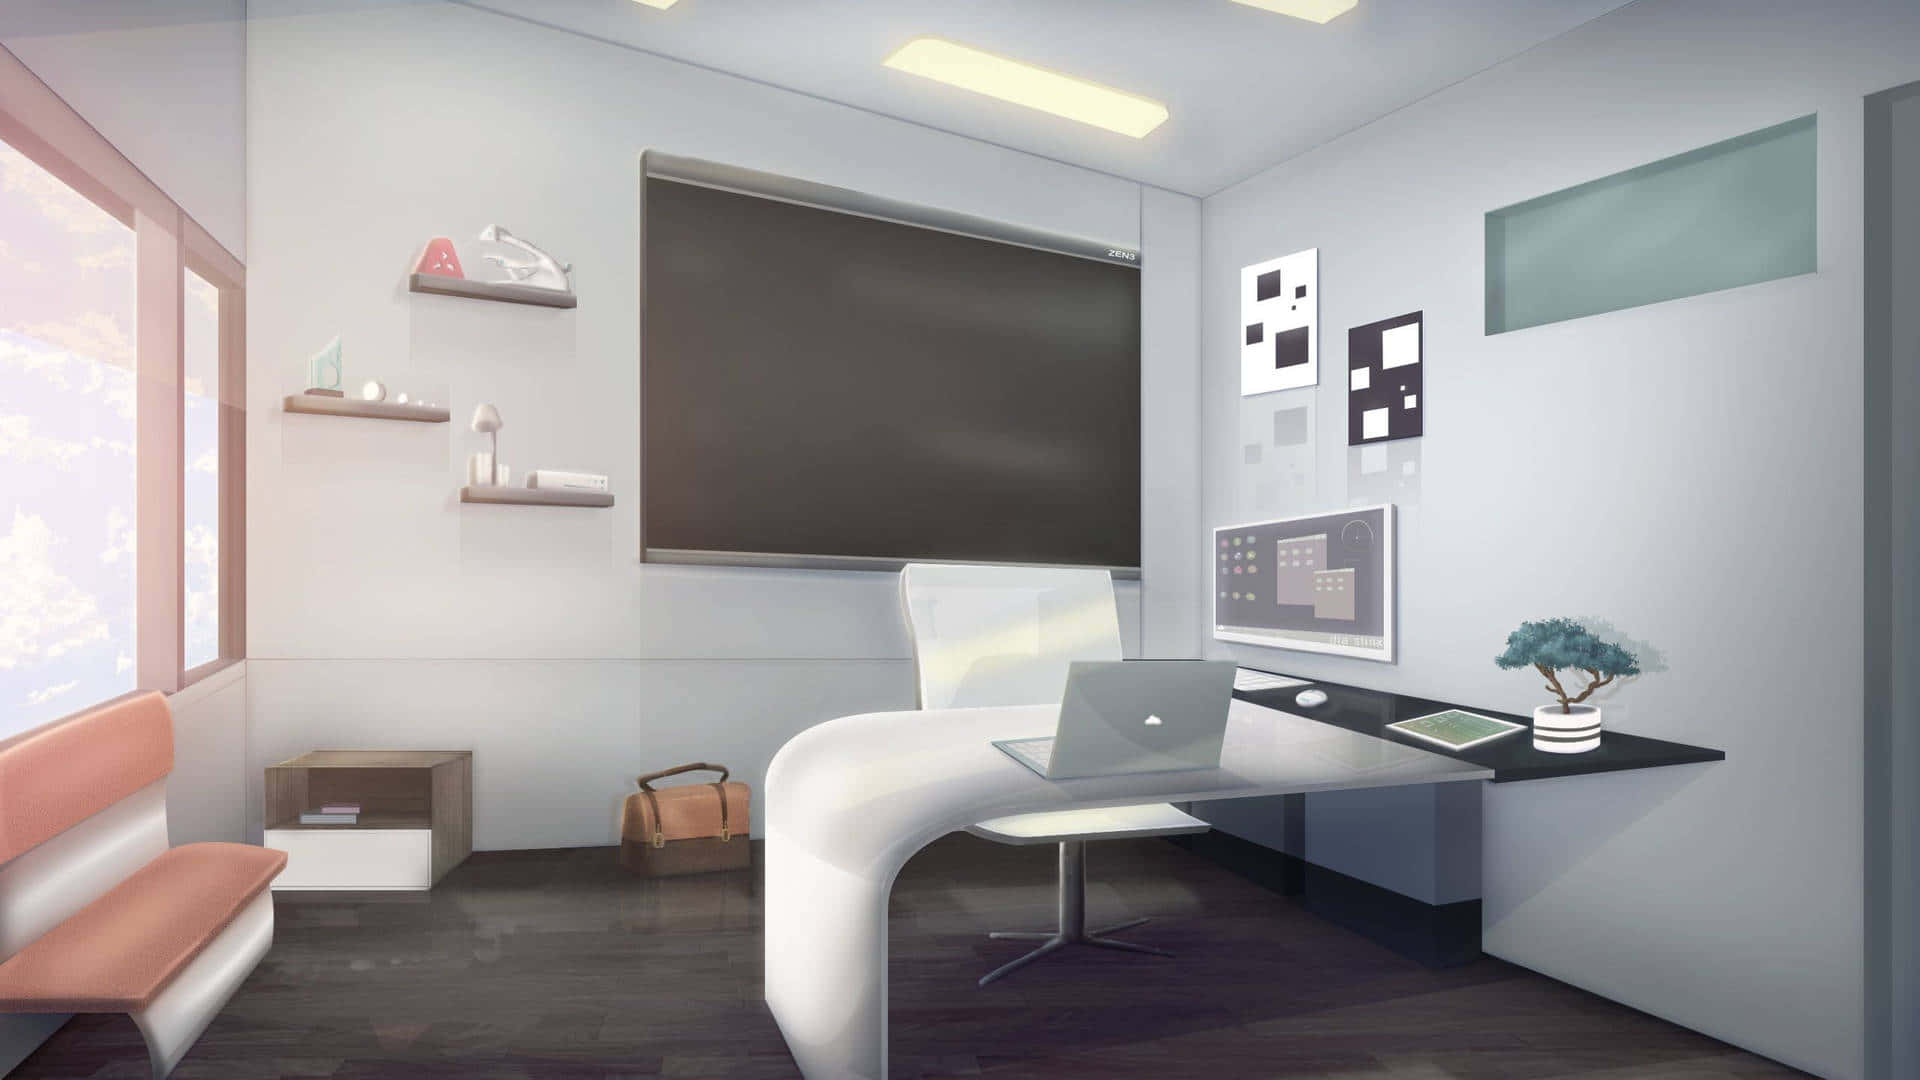 A simple room with a desk-anime background - Stock Illustration [102861034]  - PIXTA